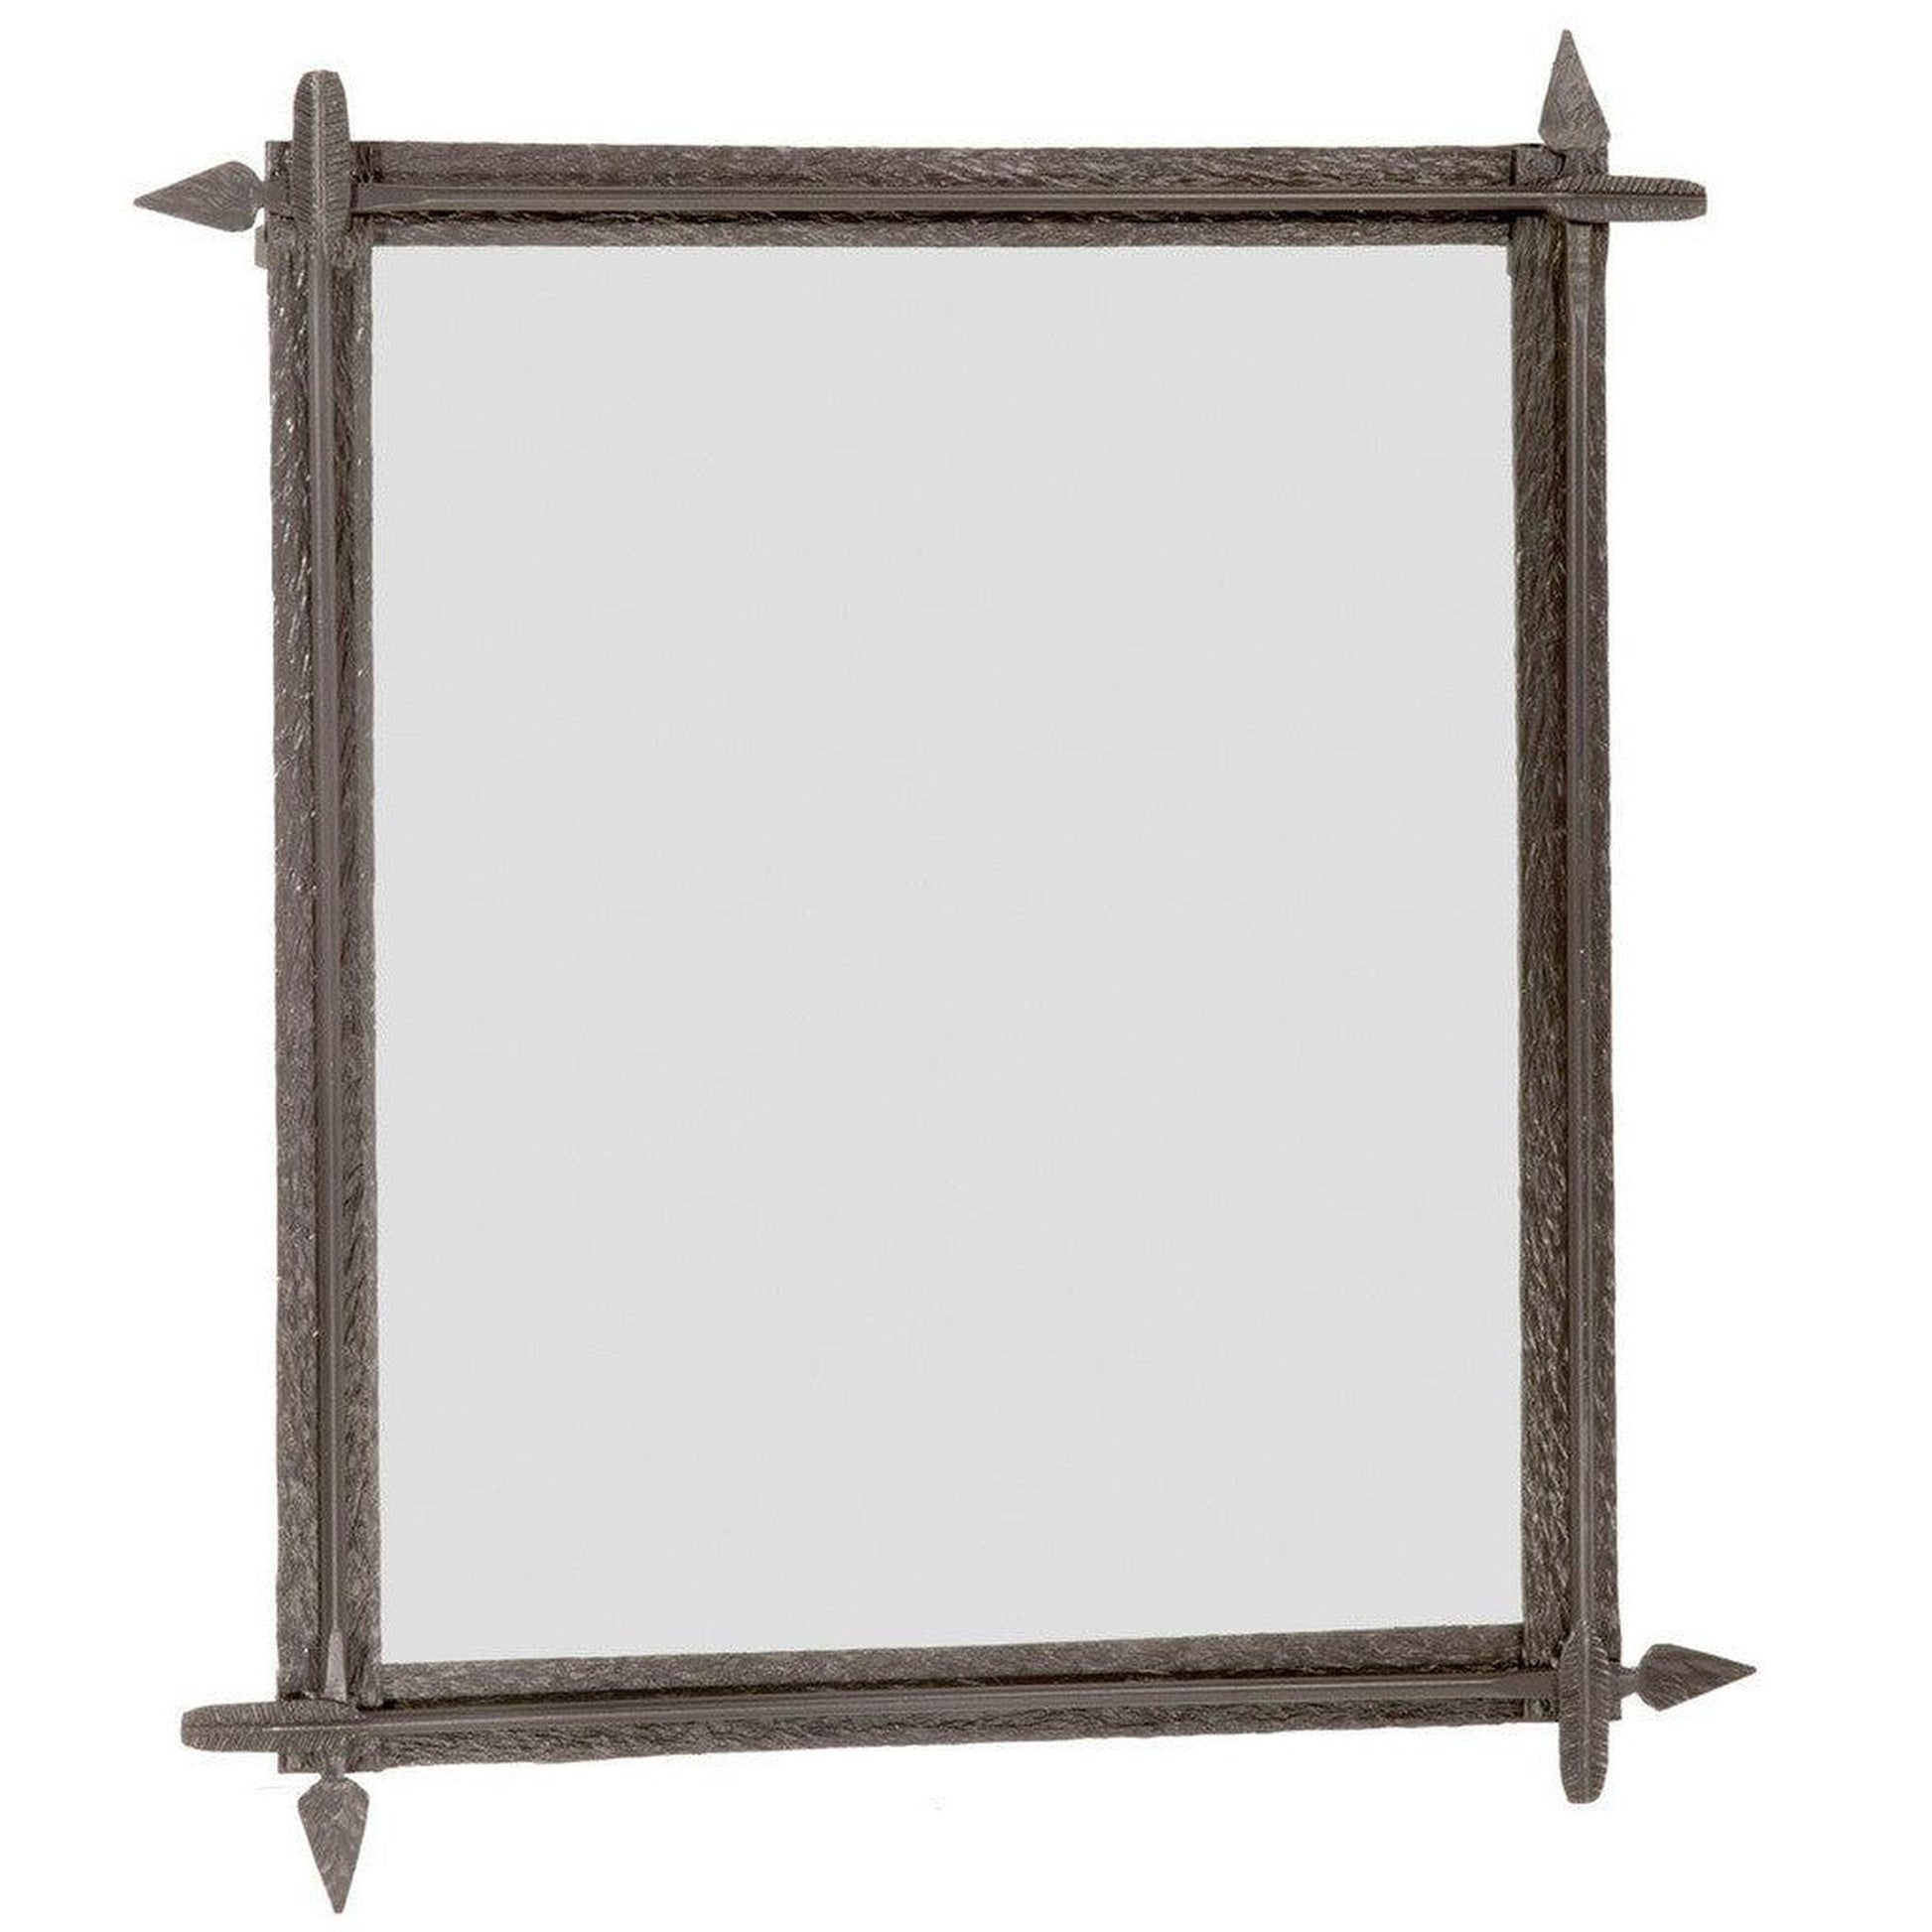 Stone County Ironworks Quapaw 31" x 43" Large Woodland Brown Iron Wall Mirror With Gold Iron Accent